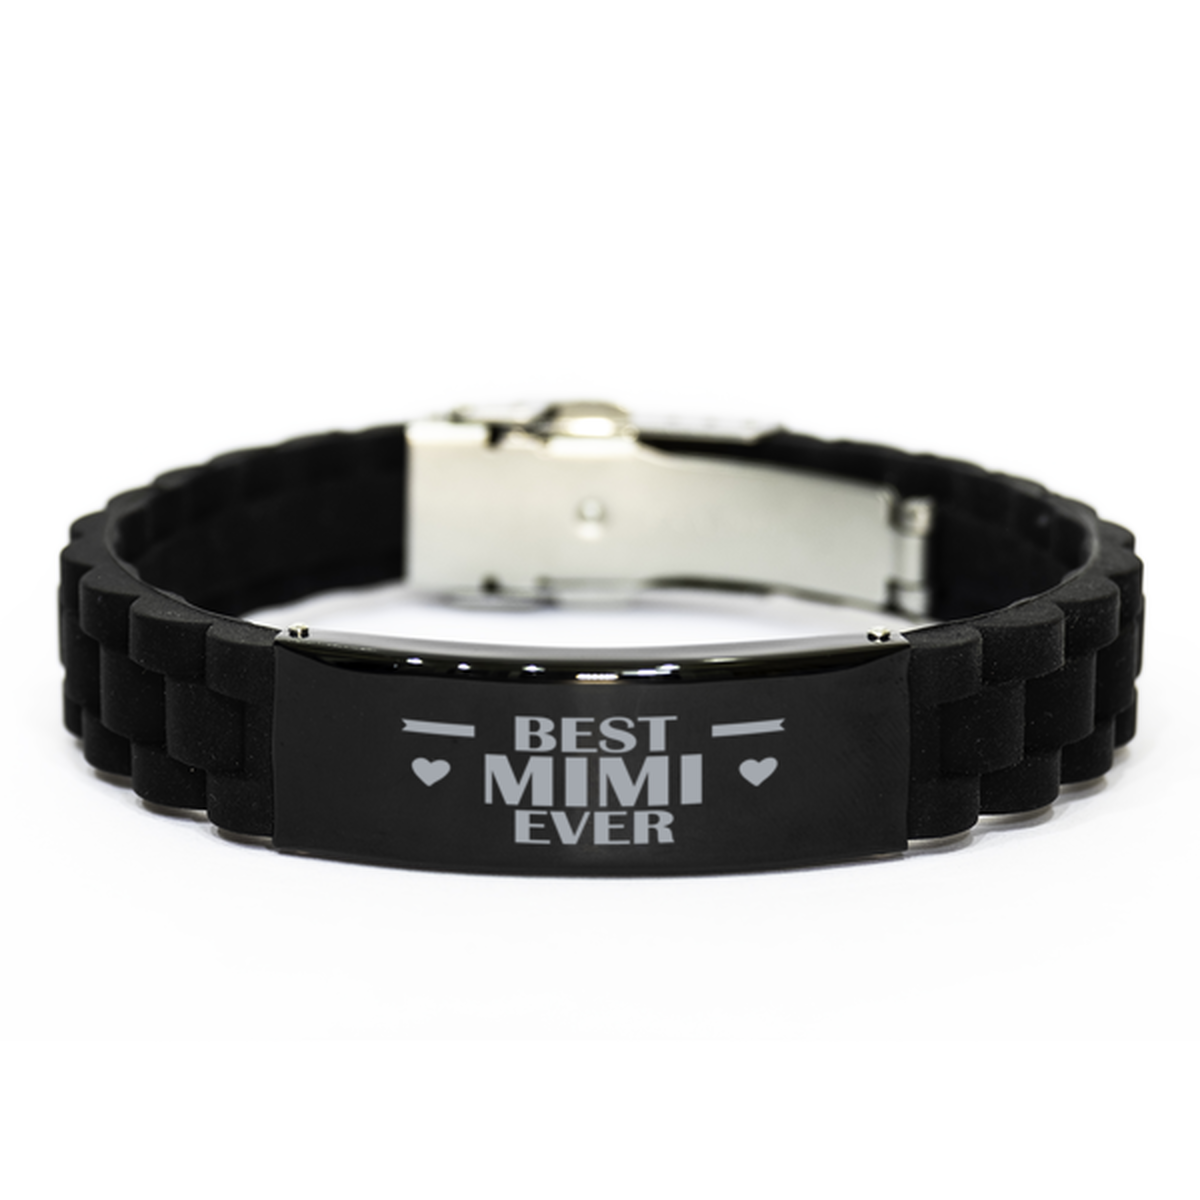 Best Mimi Ever Mimi Gifts, Funny Black Engraved Bracelet For Mimi, Family Gifts For Women